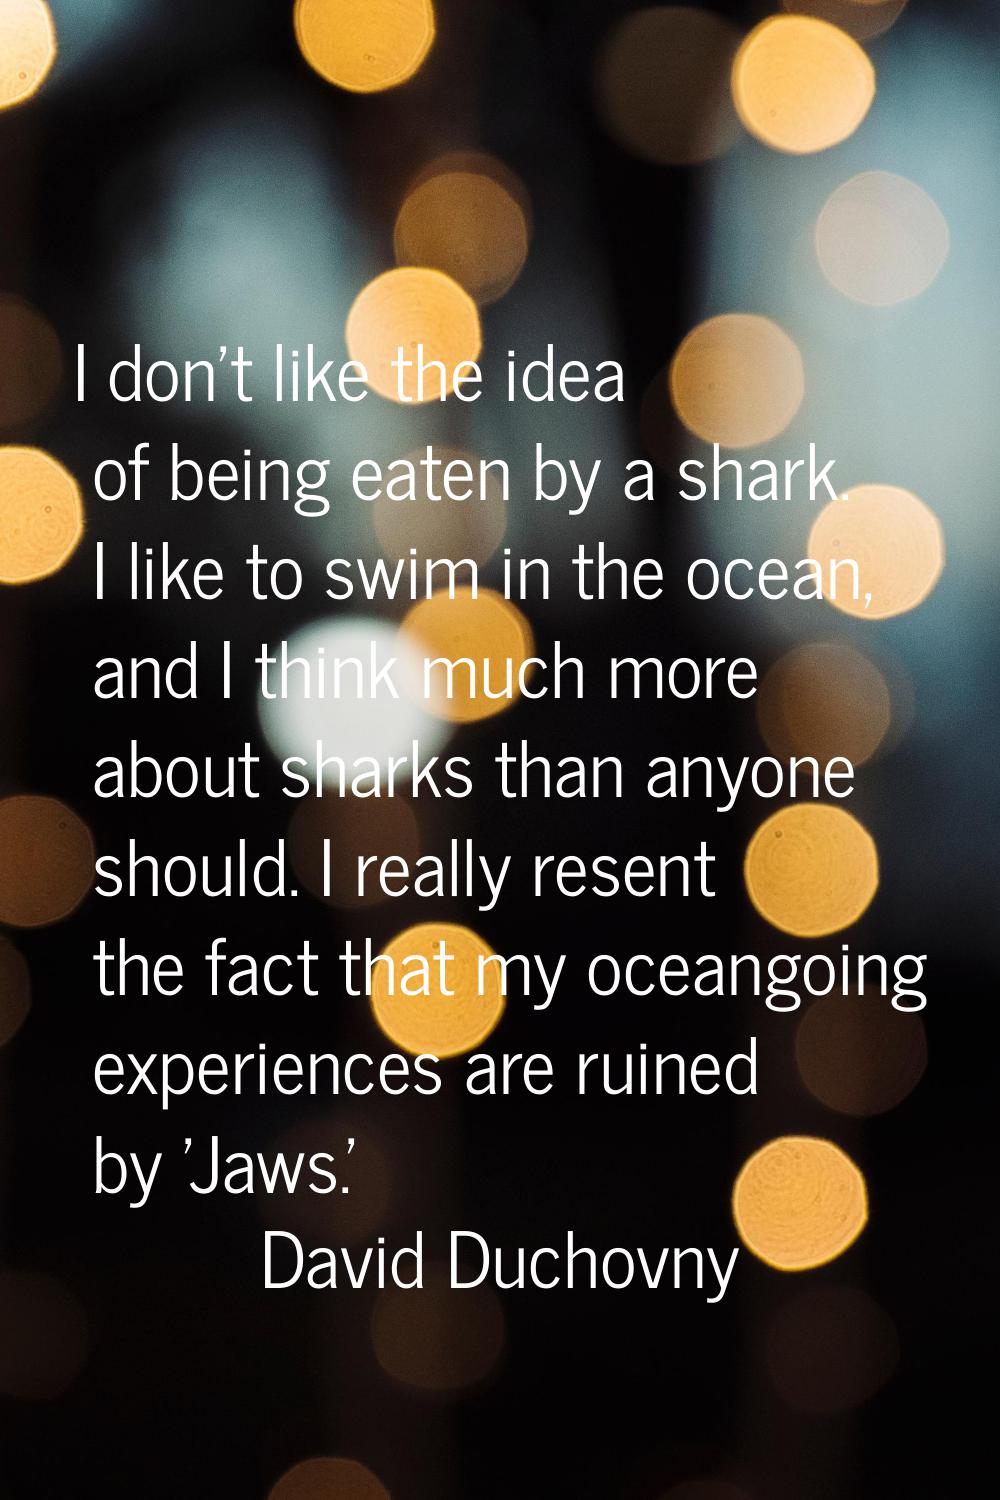 I don't like the idea of being eaten by a shark. I like to swim in the ocean, and I think much more